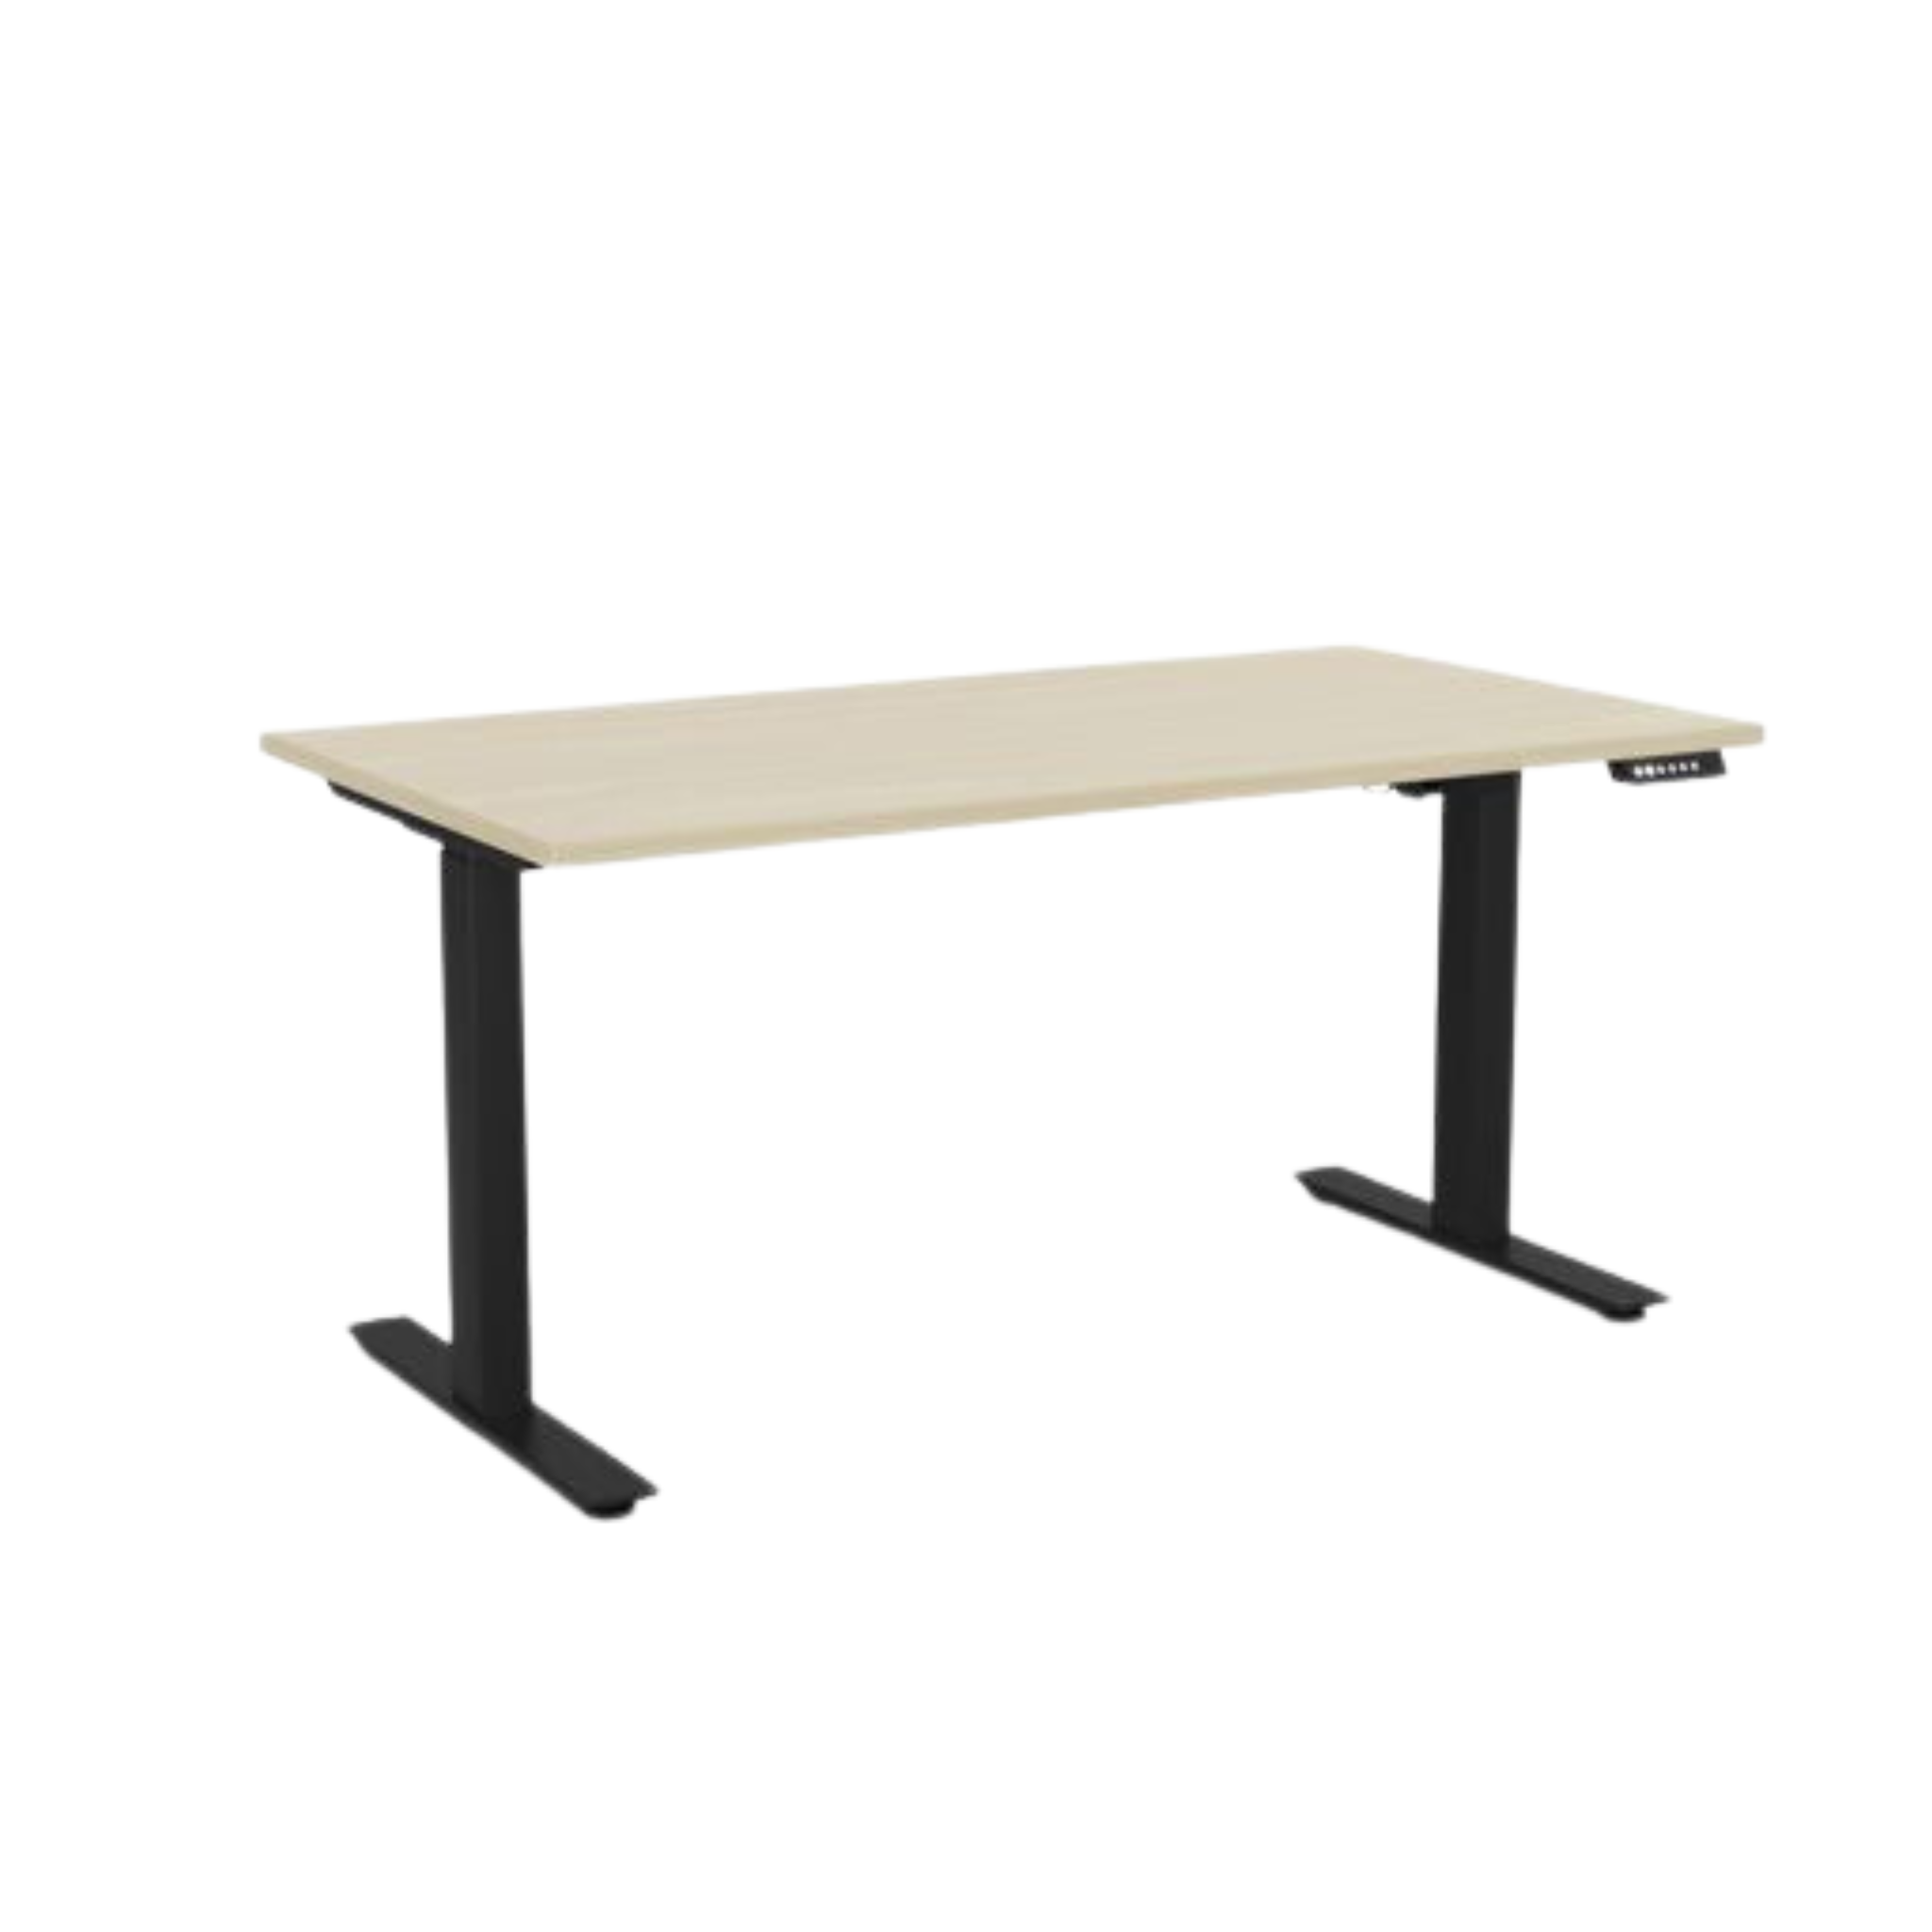 Agile 2 electric sit to stand desk with black frame and nordic maple top